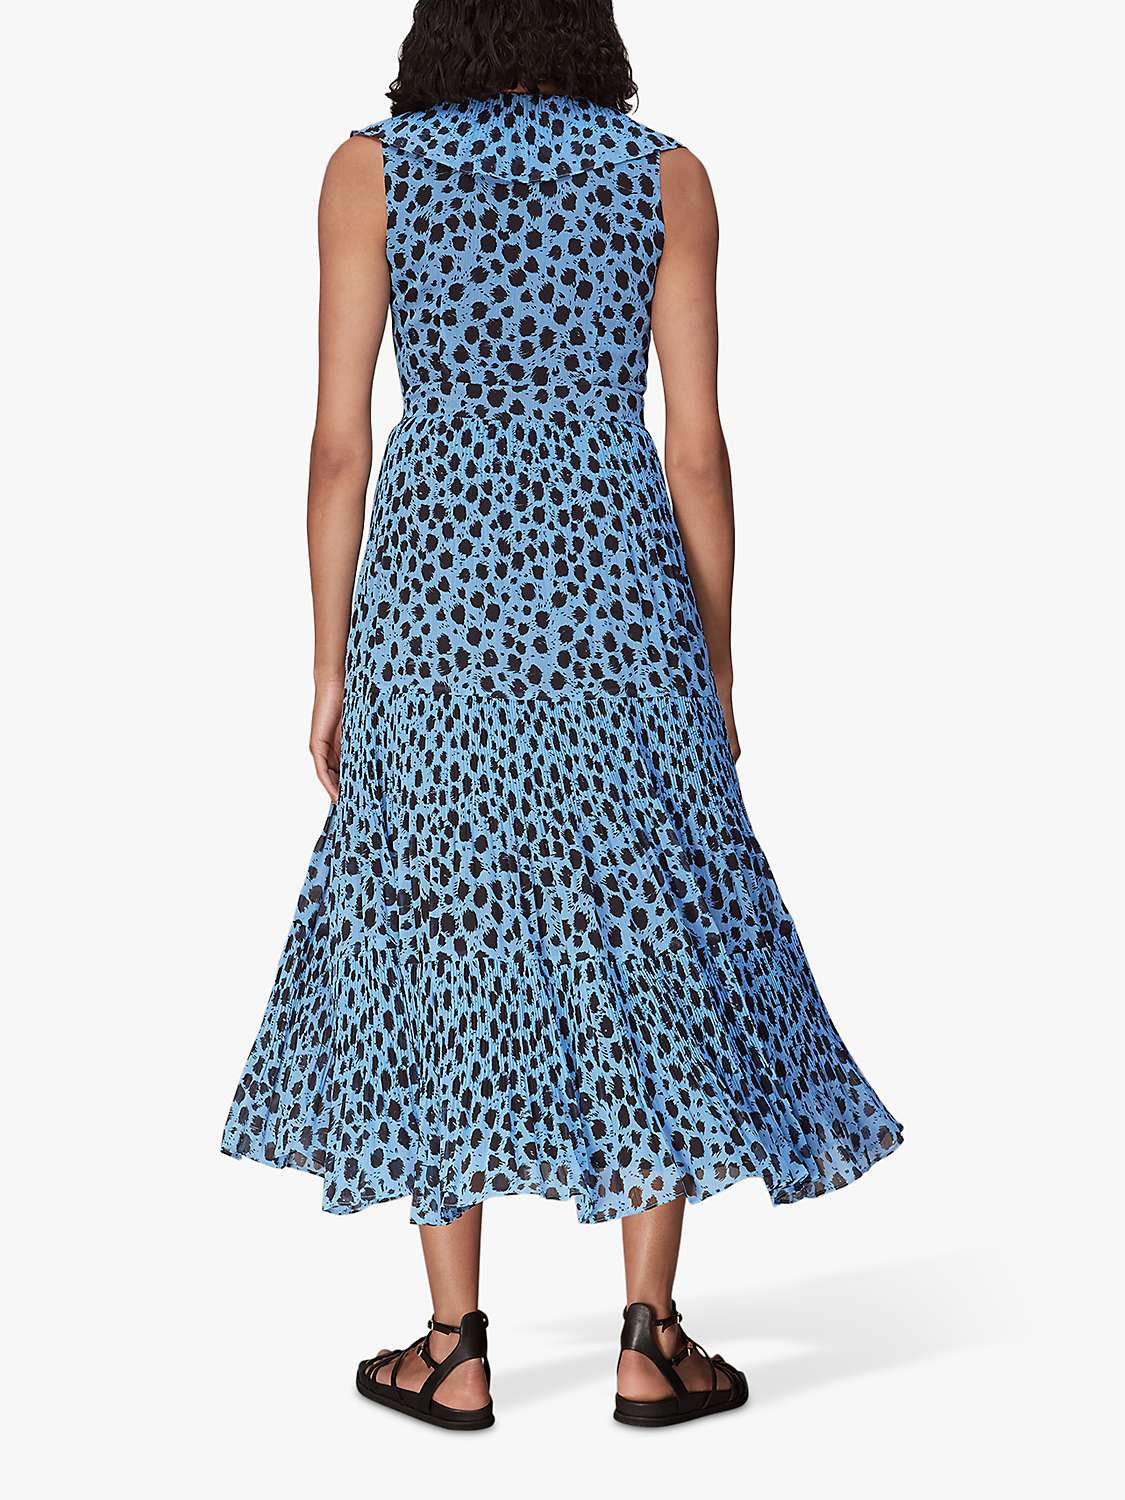 Buy Whistles Brushed Dalmation Print Tiered Midi Dress, Blue/Multi Online at johnlewis.com